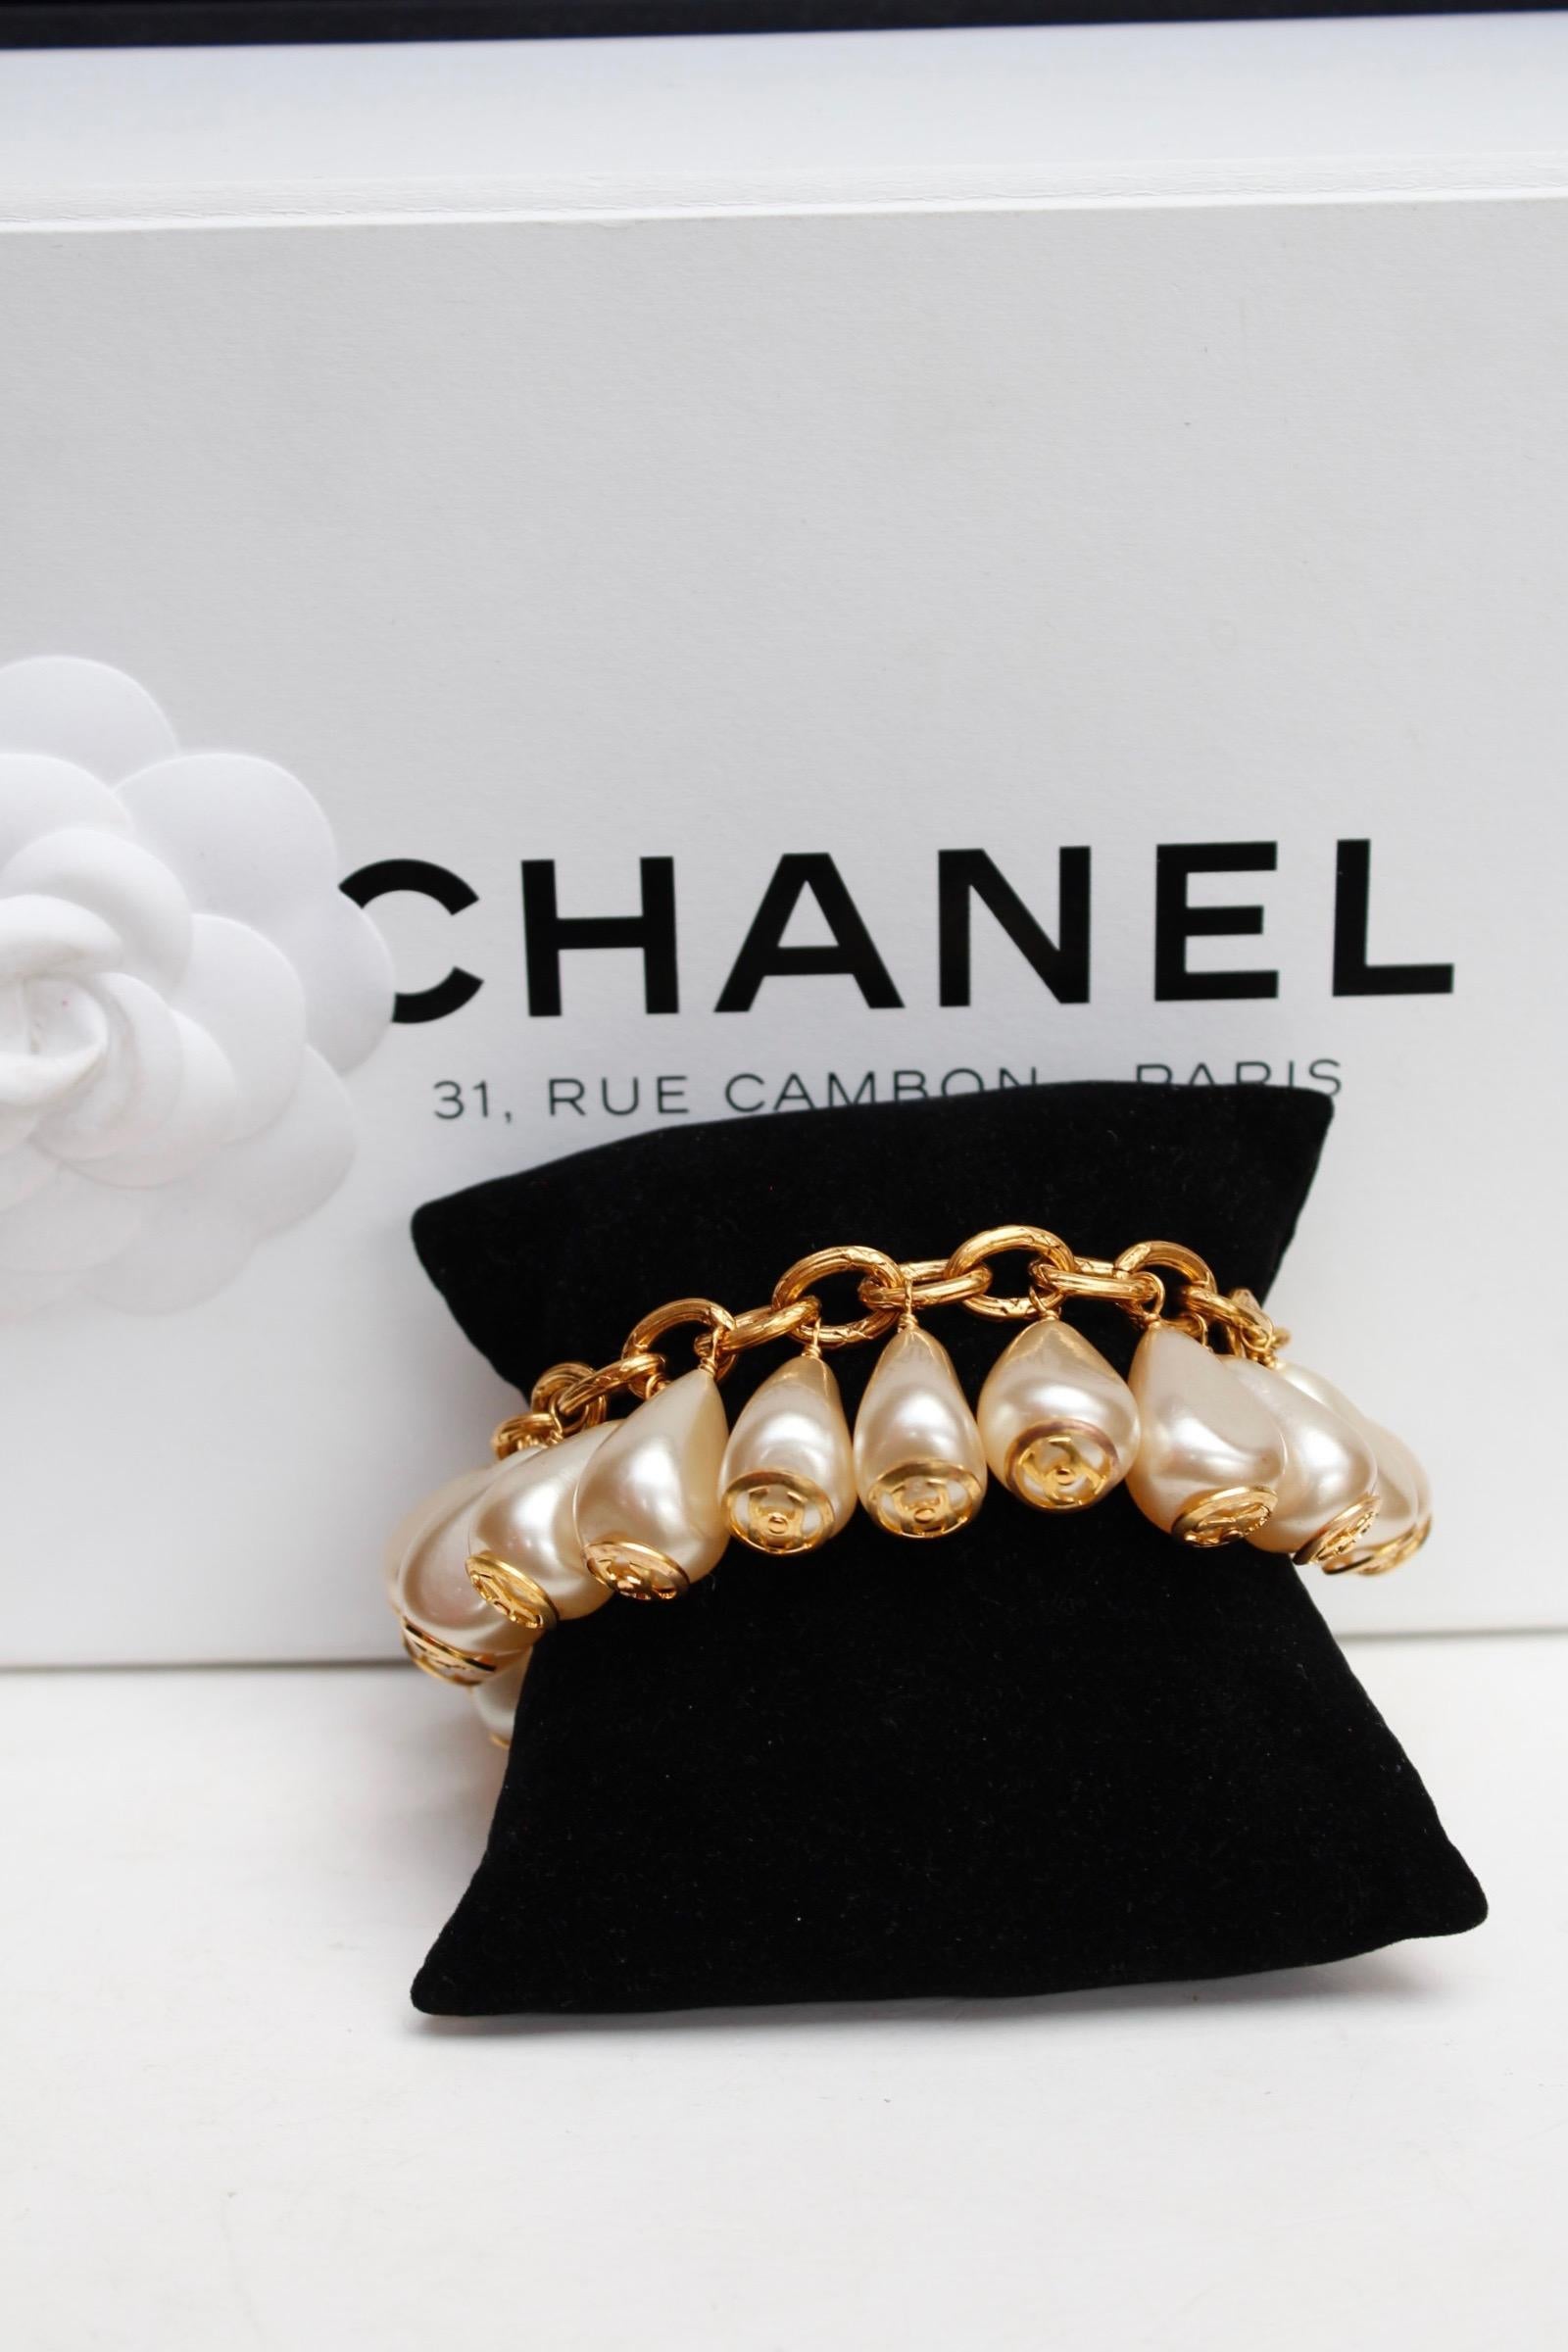 CHANEL (Made in France)
Lovely gilted metal chain bracelet adorned by faux pearly drops elements along its length. Each drop is decorated by an openworked gilted metal circle centered by a CC logo .

Signed on a plate, affixed on a drop, next to the